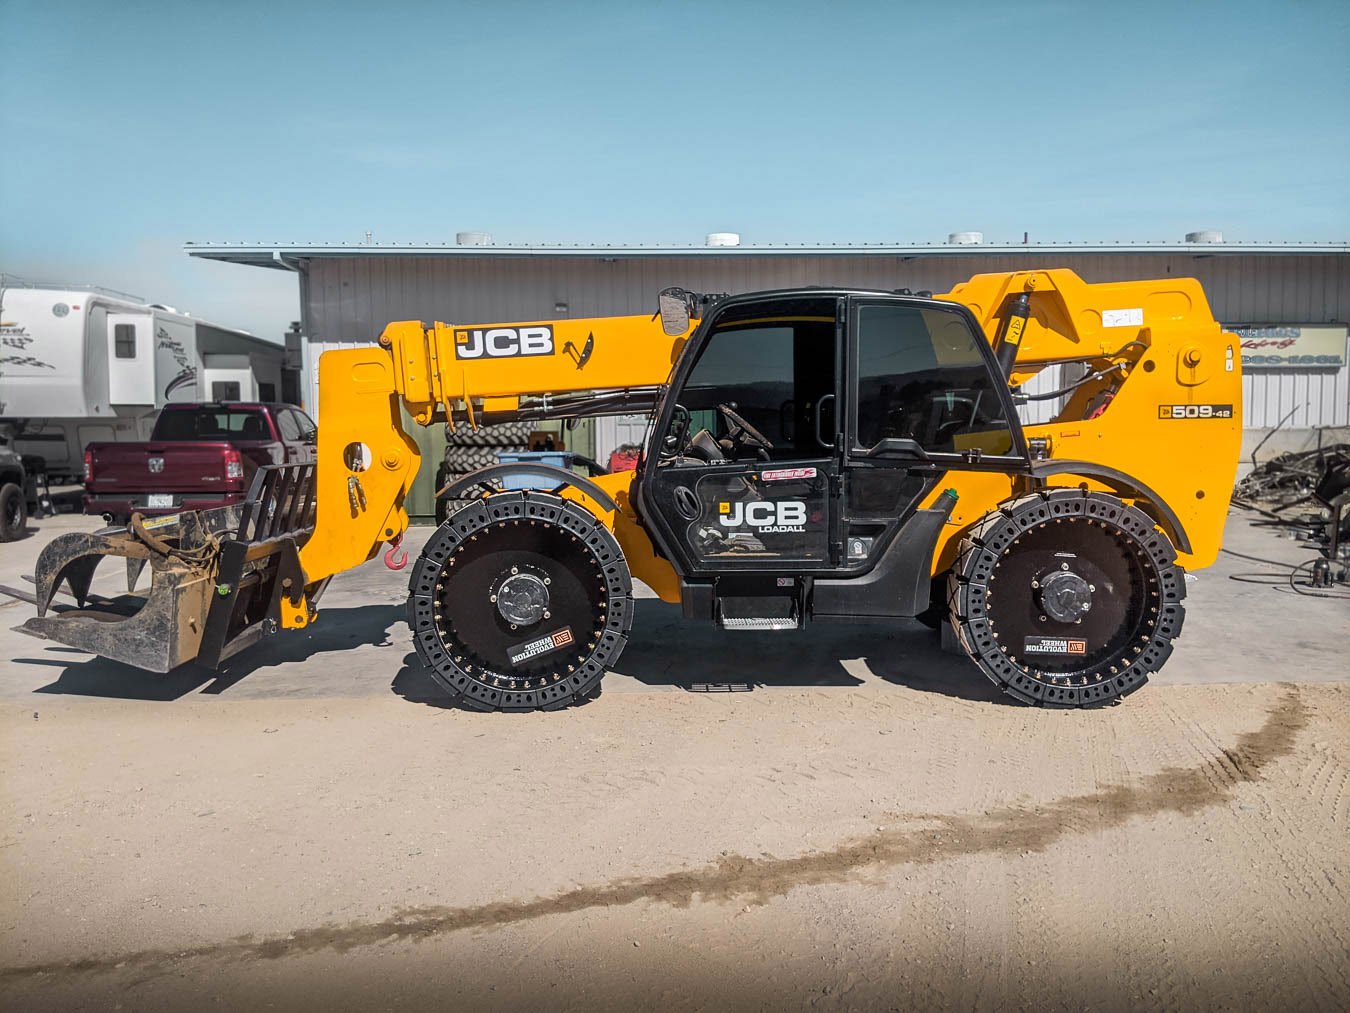 This picture shows our CAT telehandler tires on a black and yellow JCB telehandler